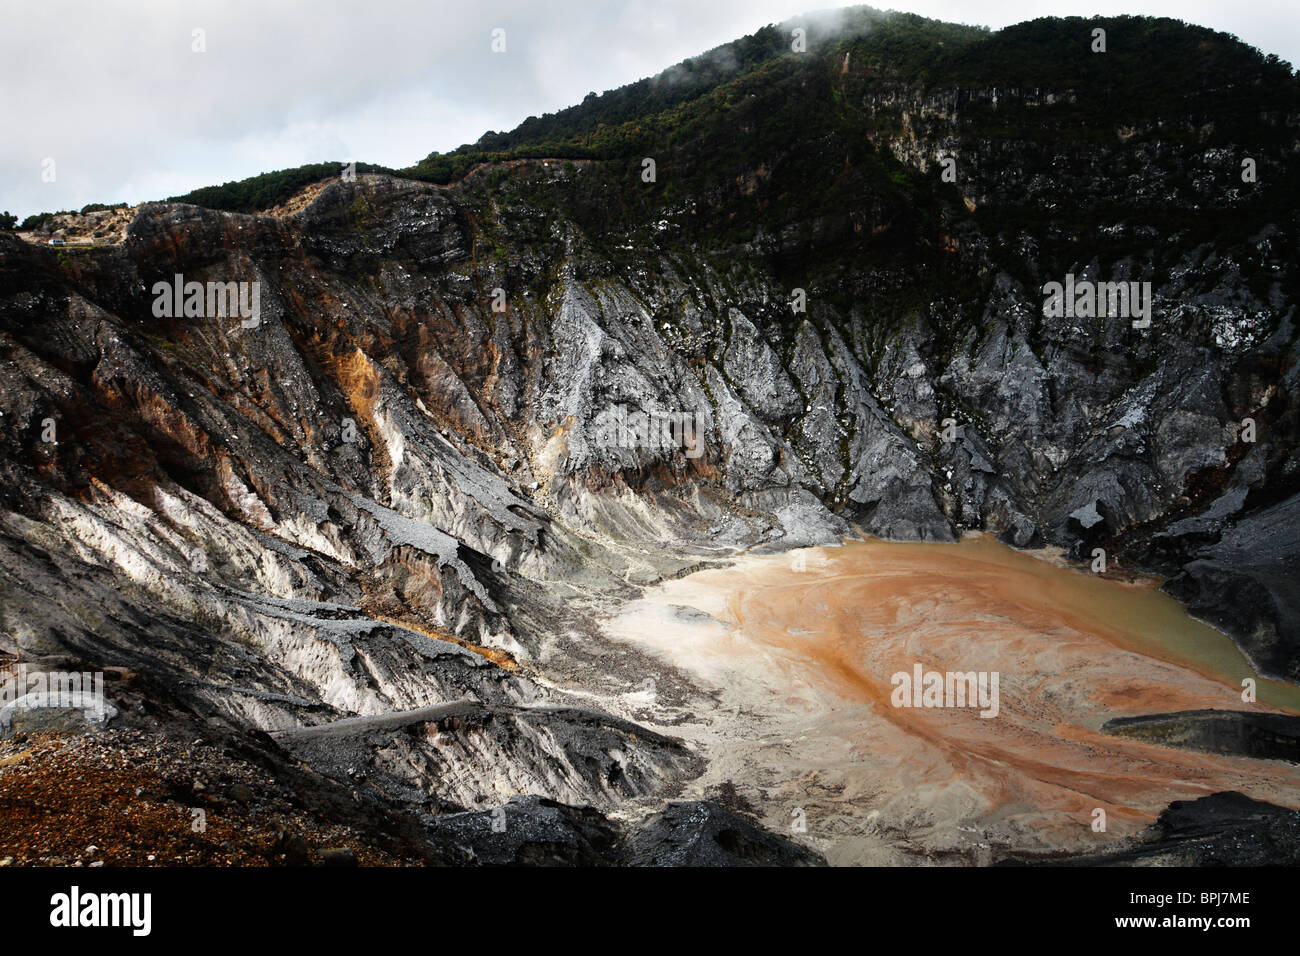 Ratu Crater at Mt. Tangkuban Perahu near Bandung, Indonesia. This dormant volcano is one of the tourist attractions in Bandung. Stock Photo